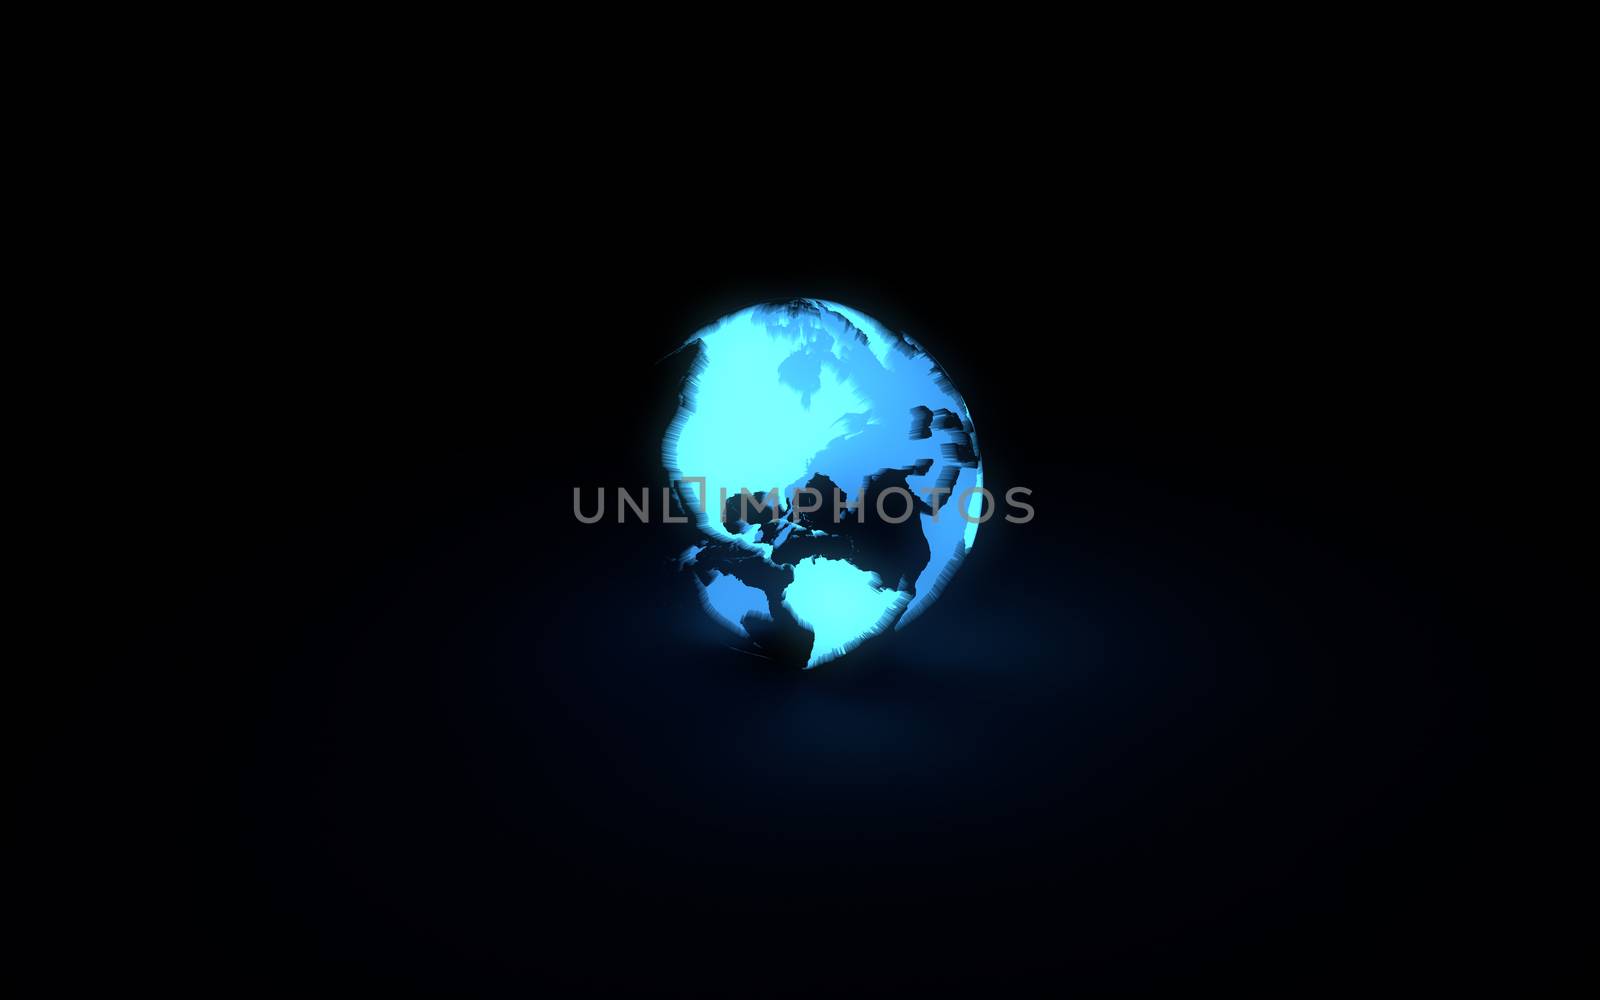 Abstract 3d model of blue glowing earth globe on black background. Front American continents